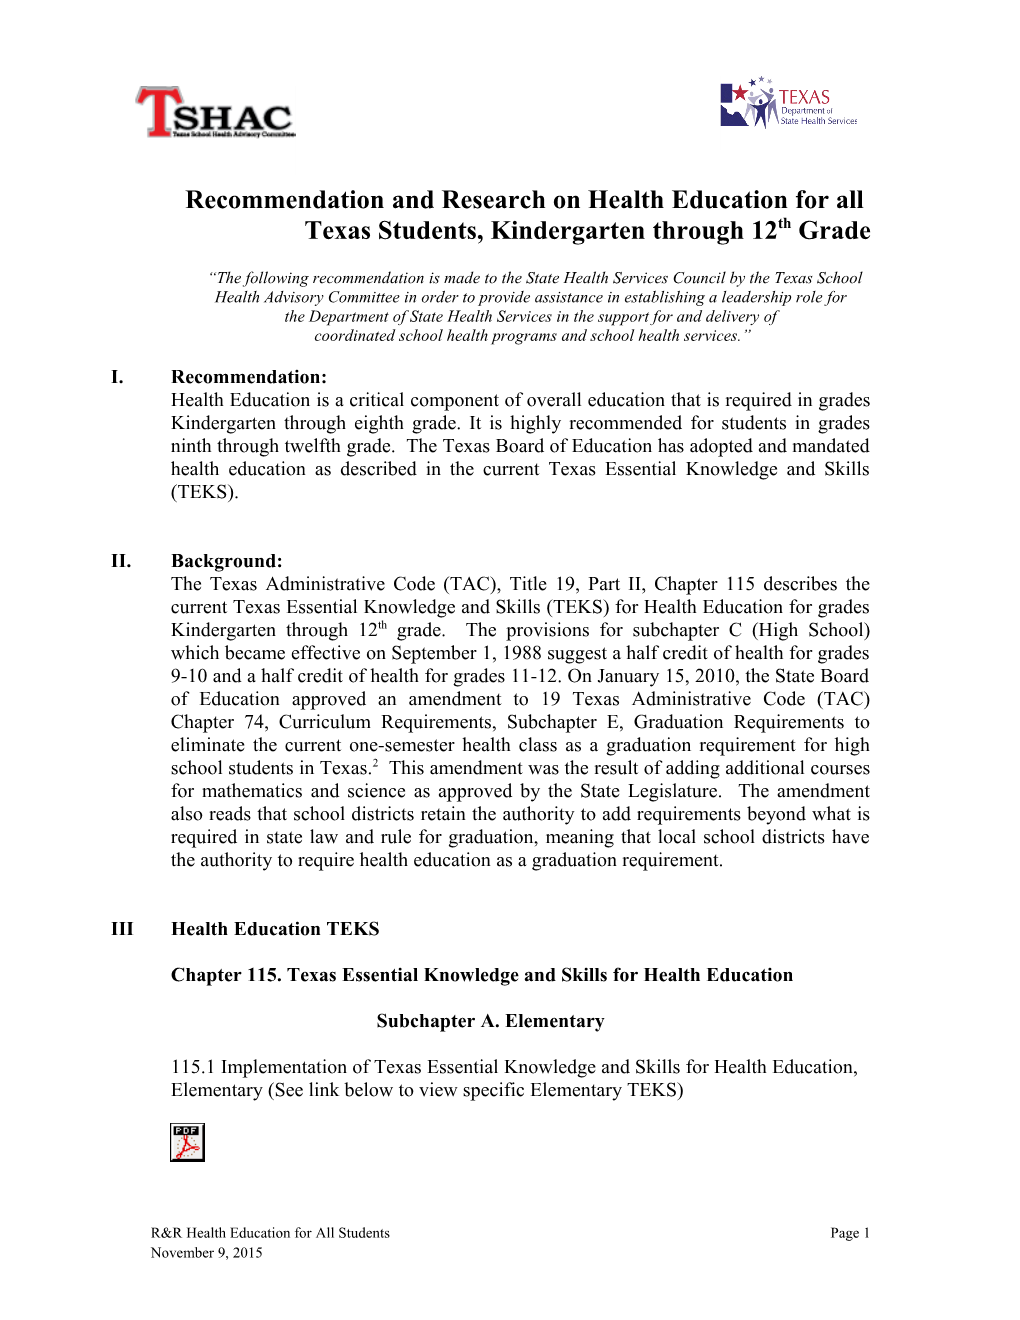 Recommendation and Research on Health Education for All November 9, 2015